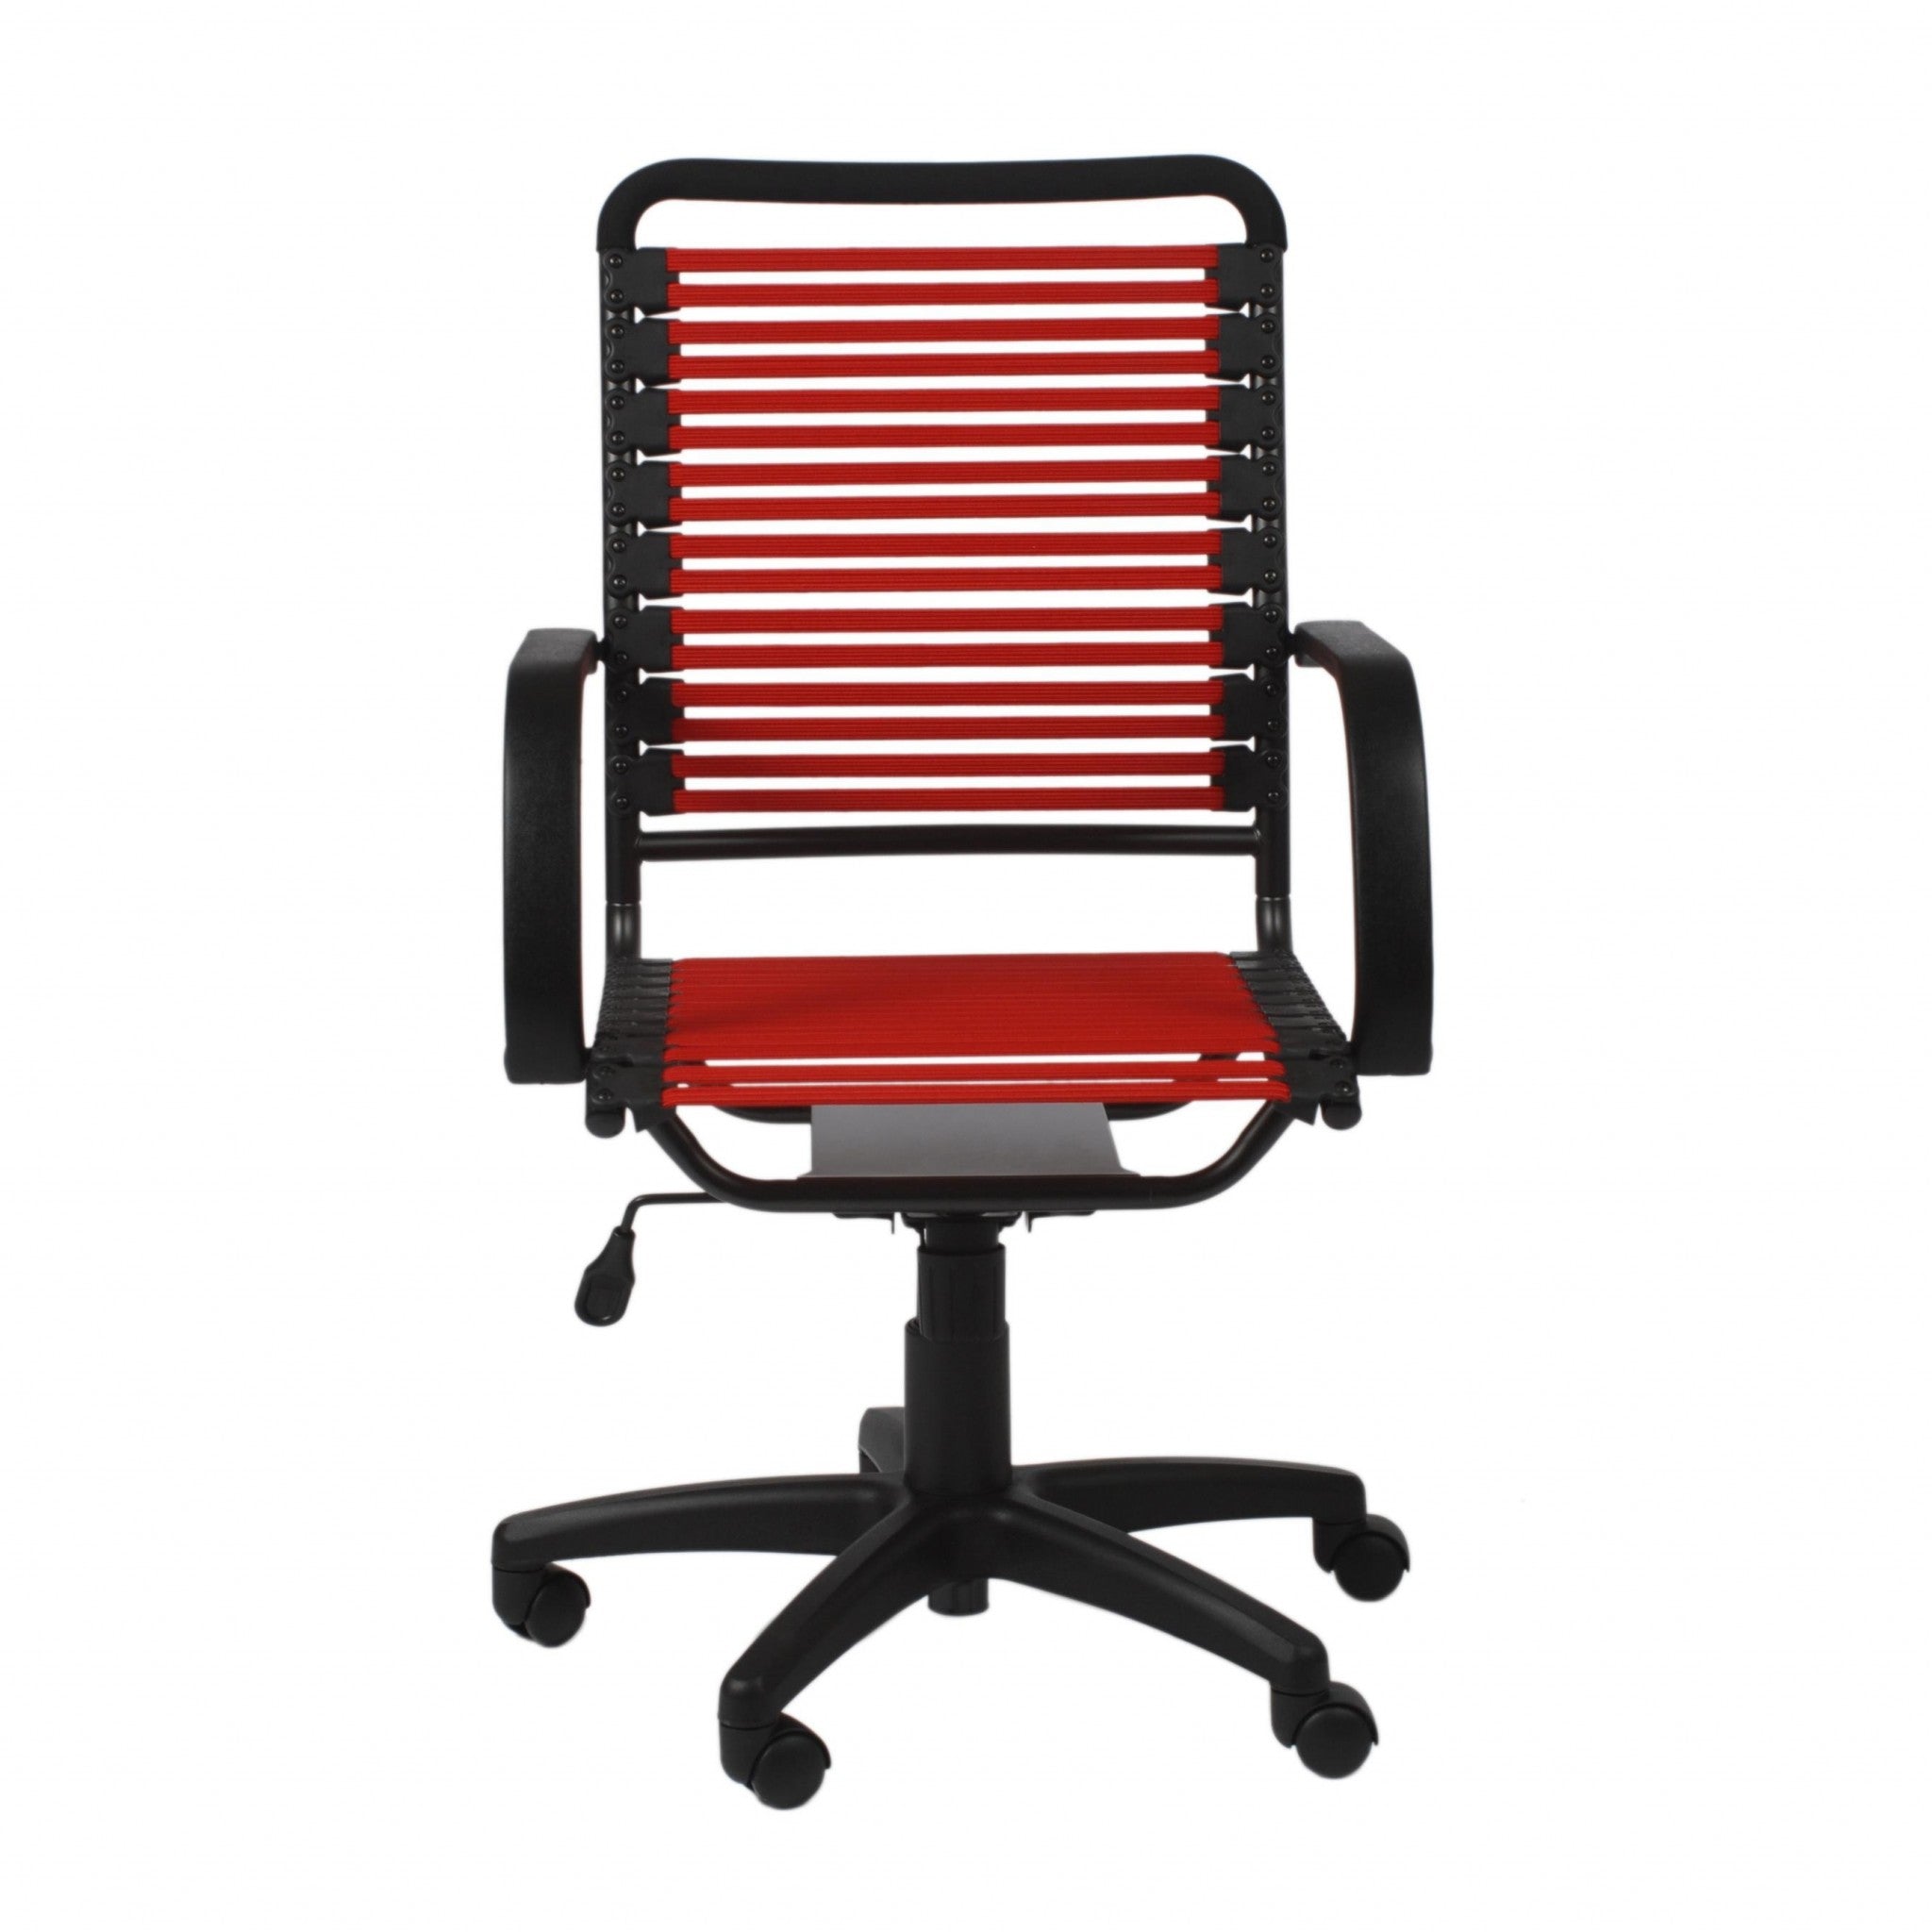 Red-Swivel-Adjustable-Task-Chair-Bungee-Back-Steel-Frame-Office-Chairs